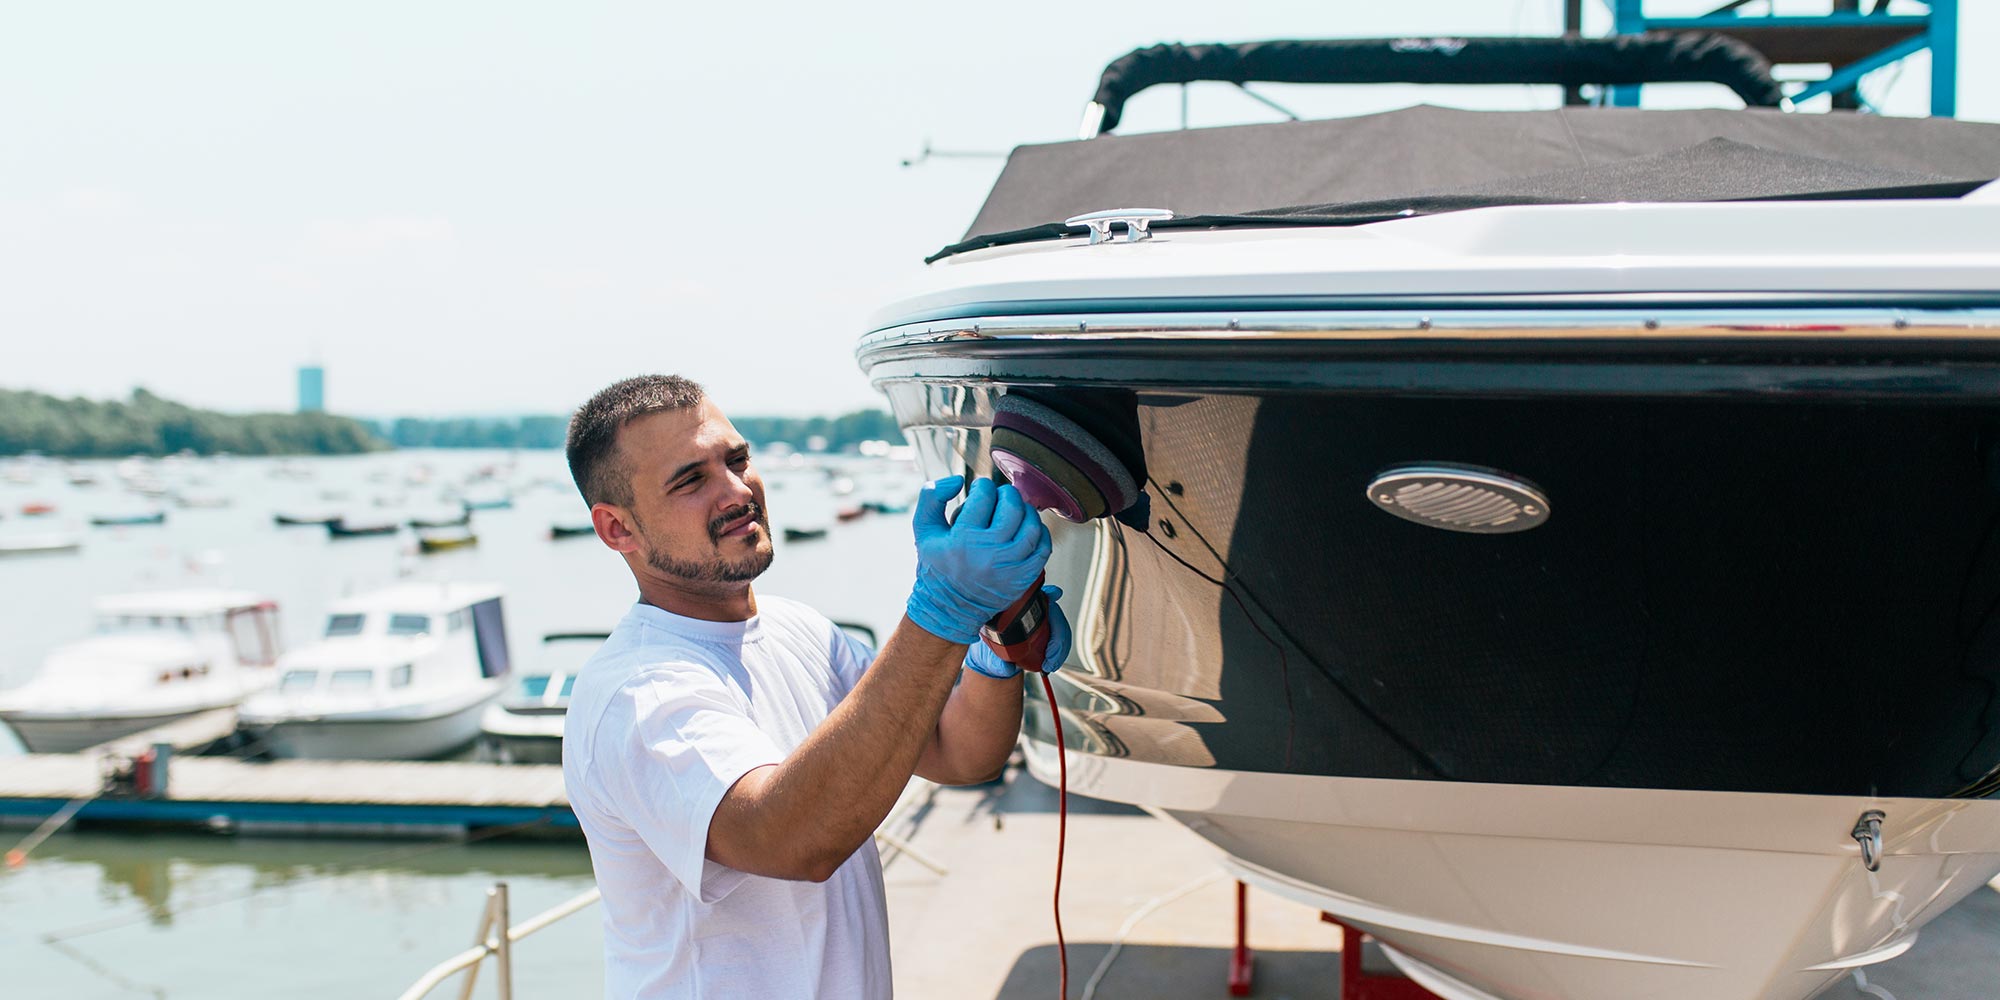 Protect your boat with Salt-Away